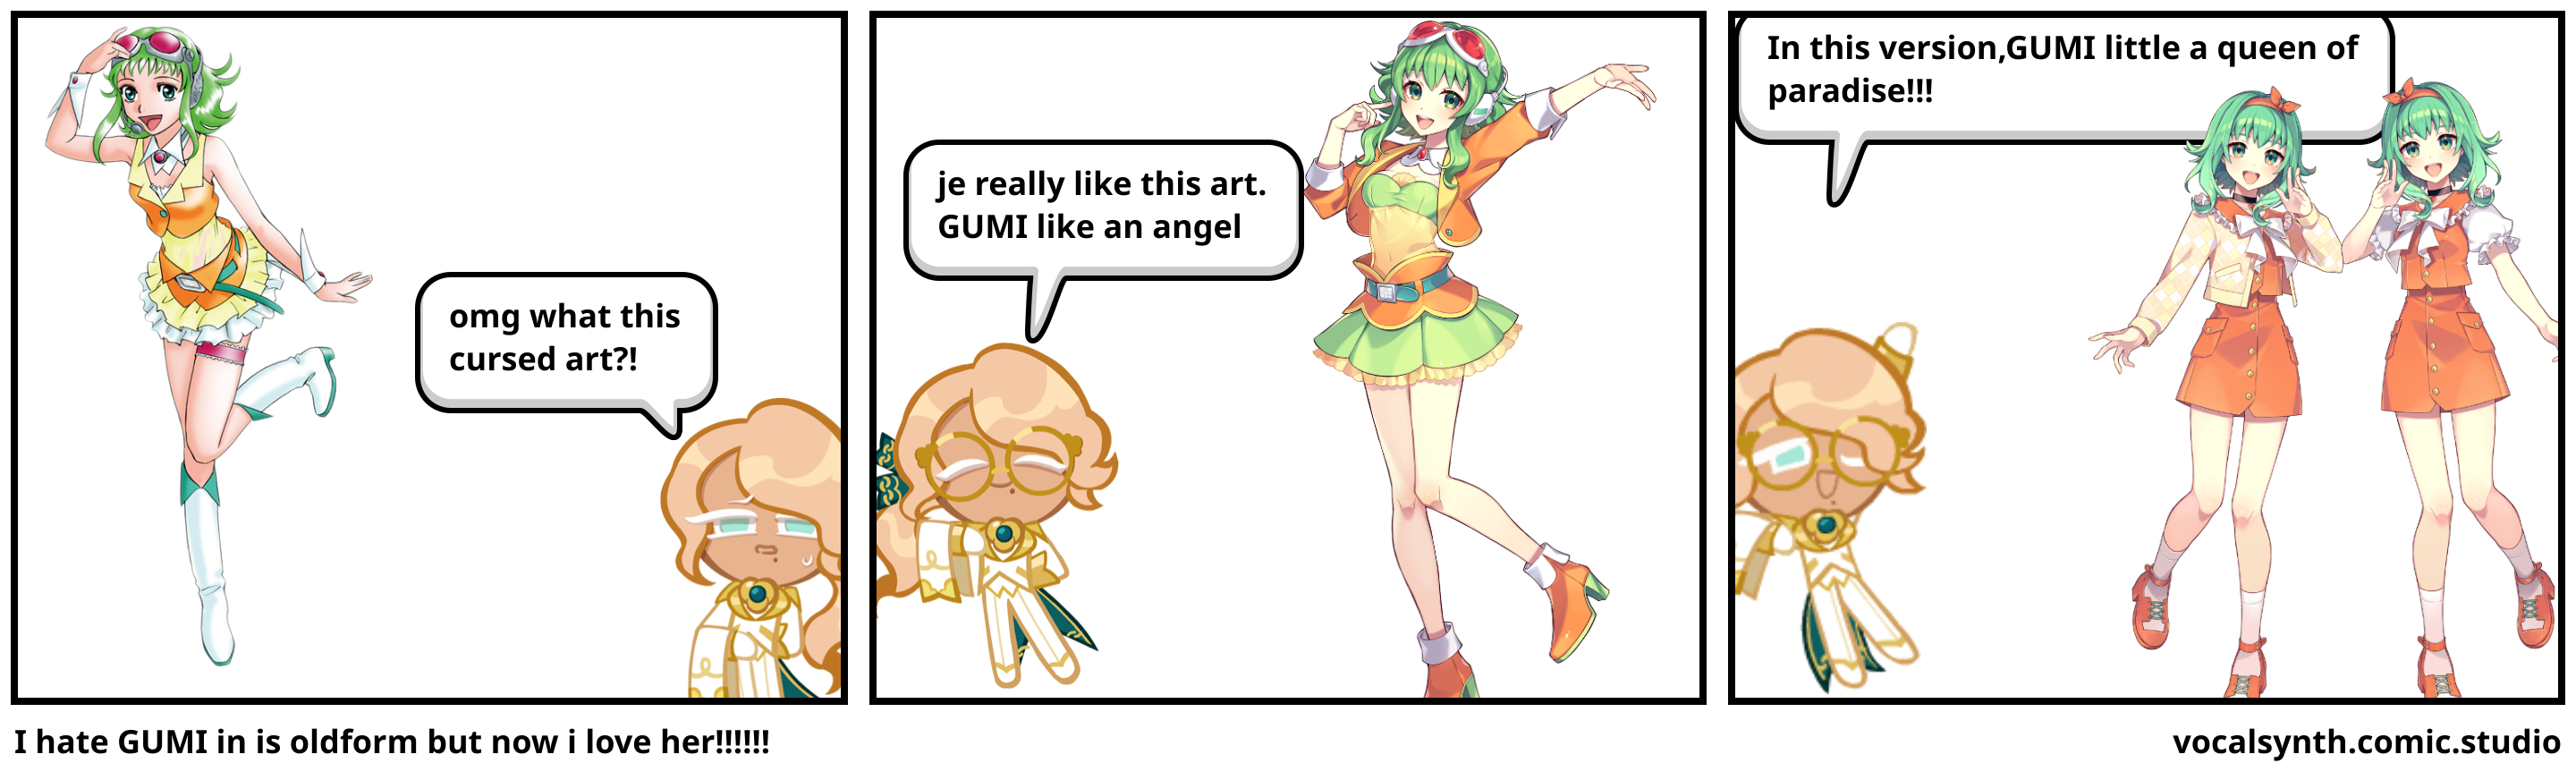 I hate GUMI in is oldform but now i love her!!!!!!